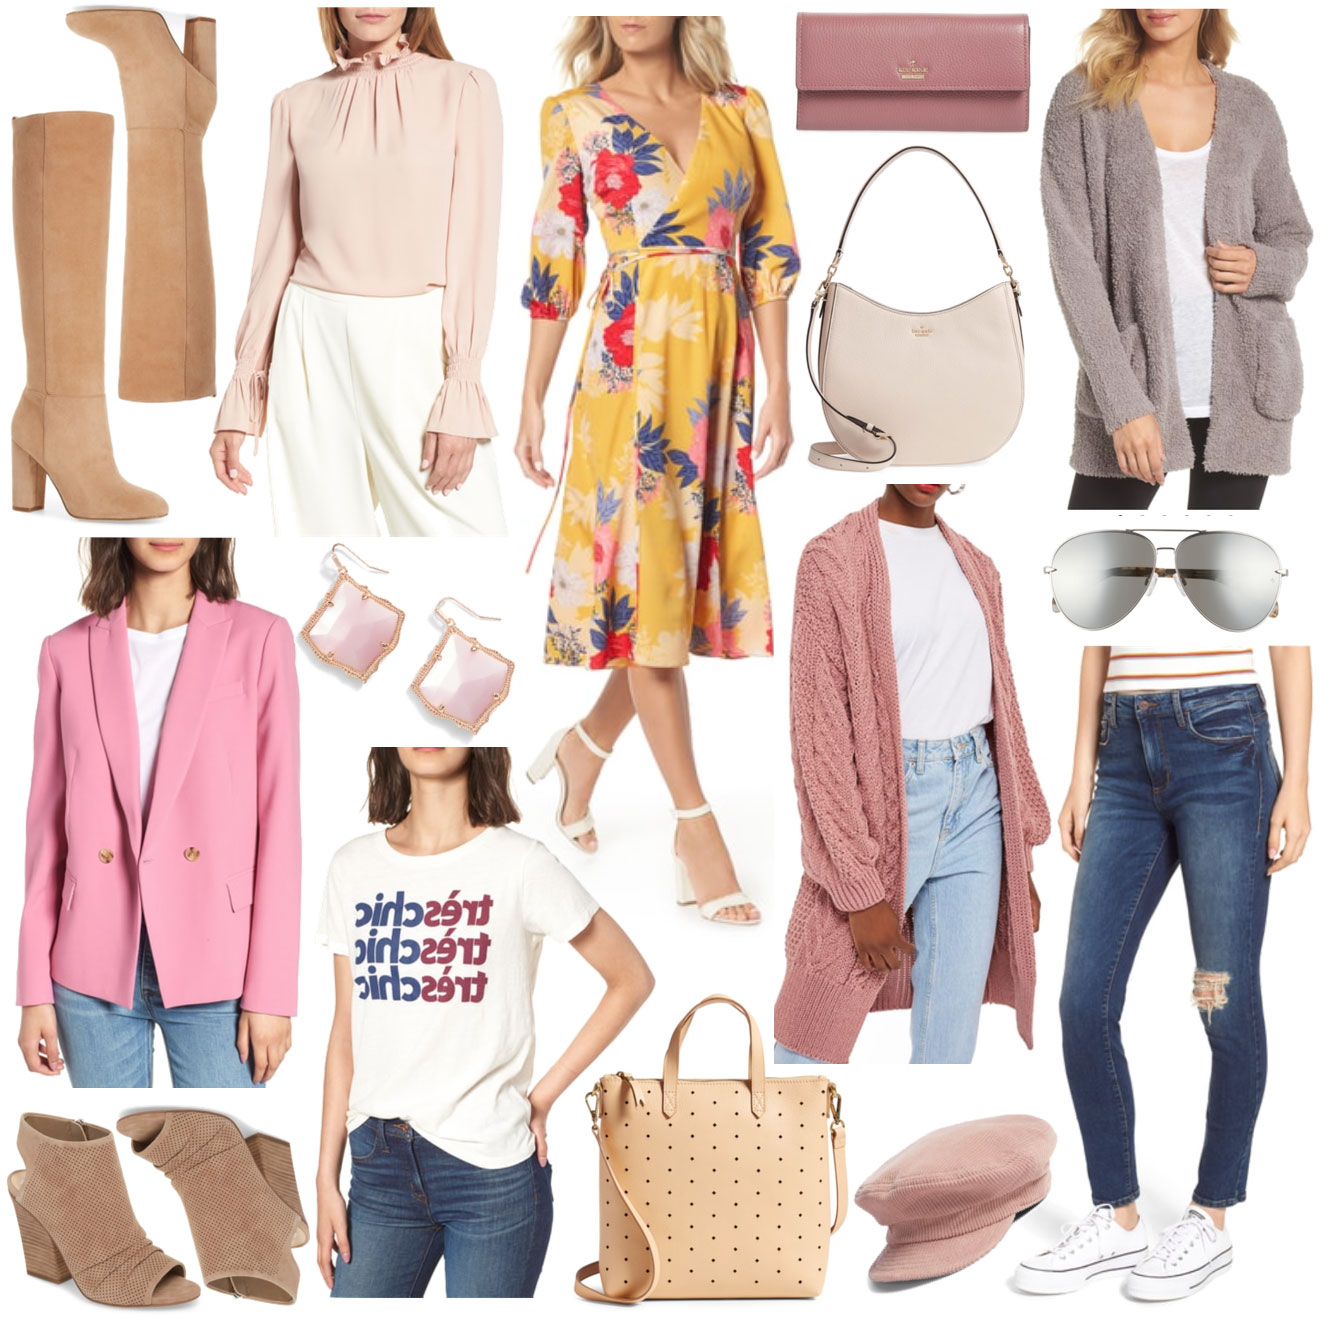 Nordstrom Anniversary Sale Wishlist 2018 - The Double Take Girls ...